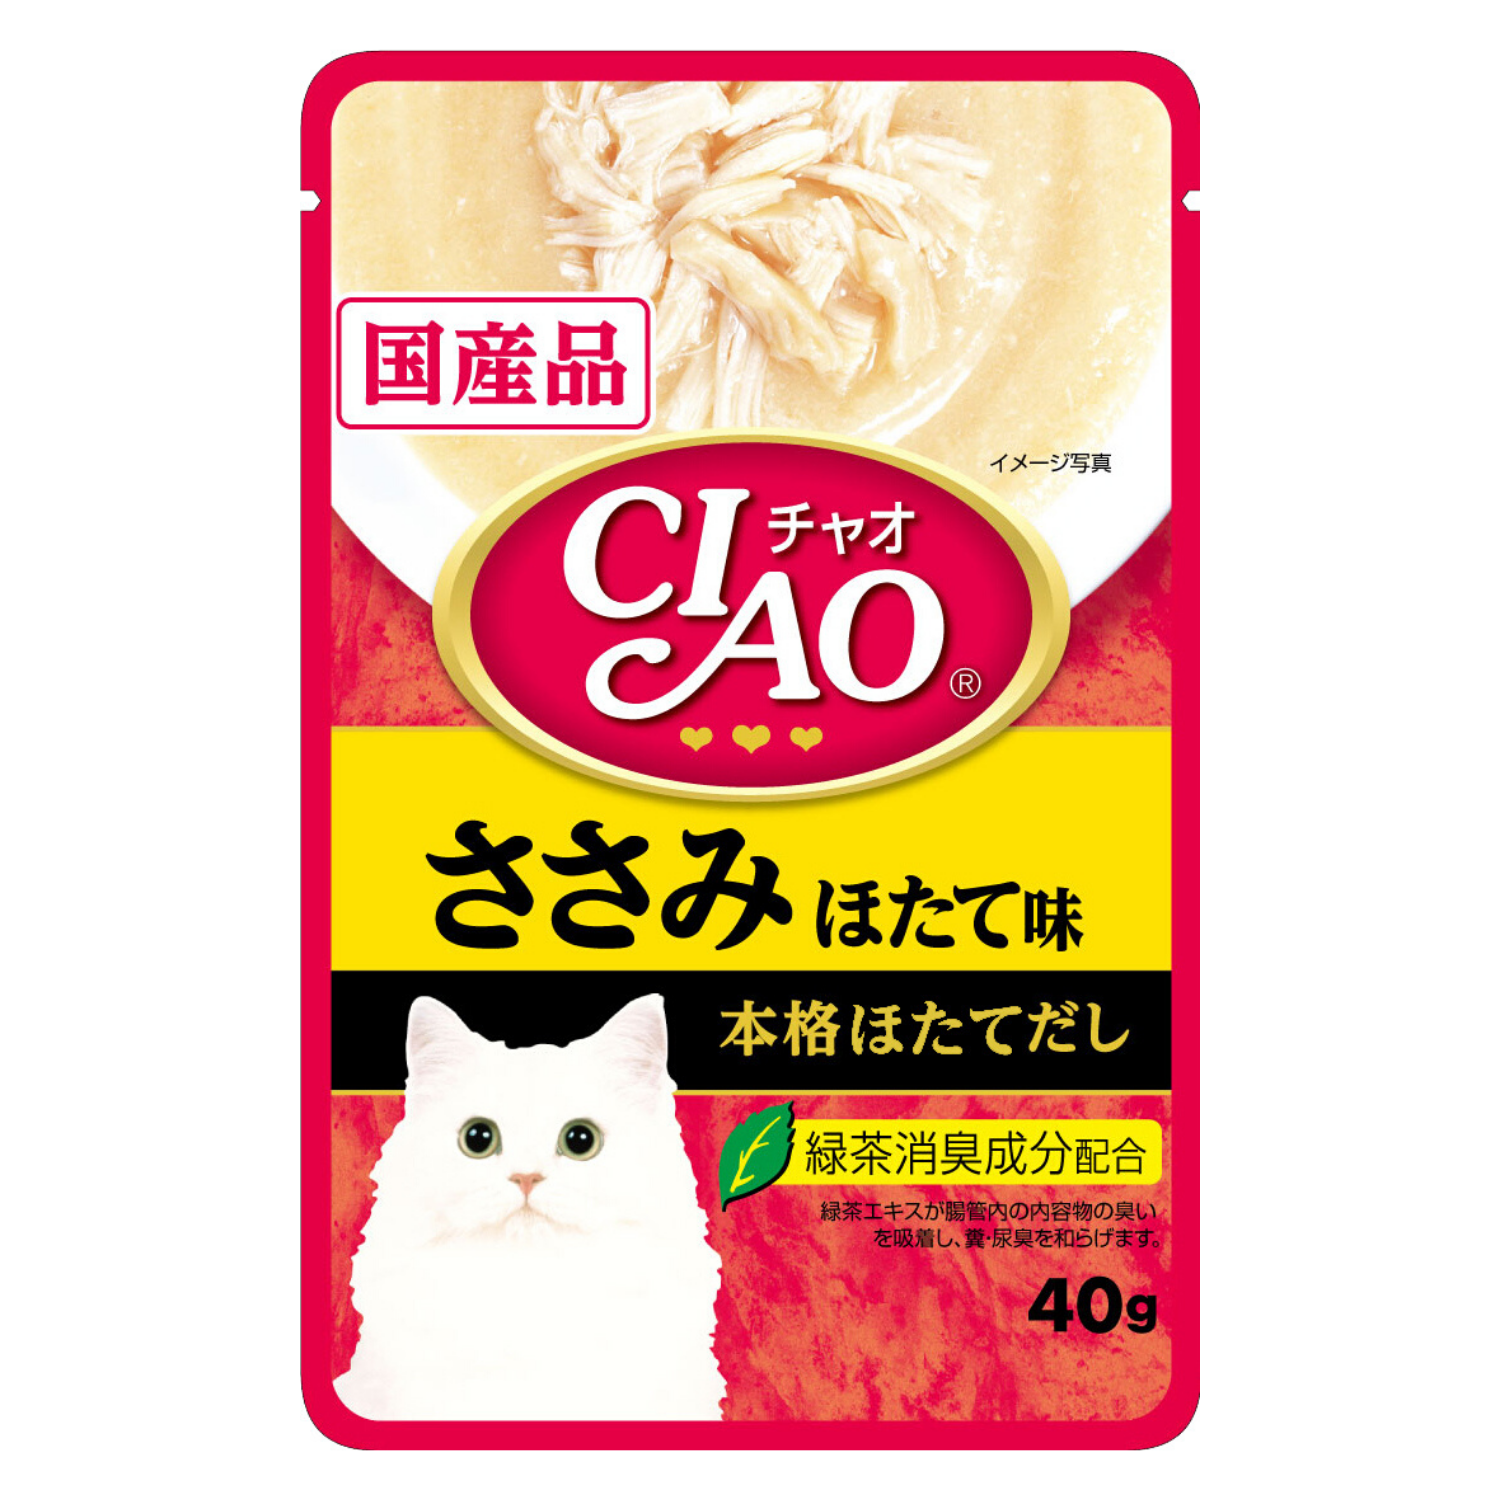 Ciao Creamy Soup Pouch Chicken Fillet Scallop Flavor - 40g